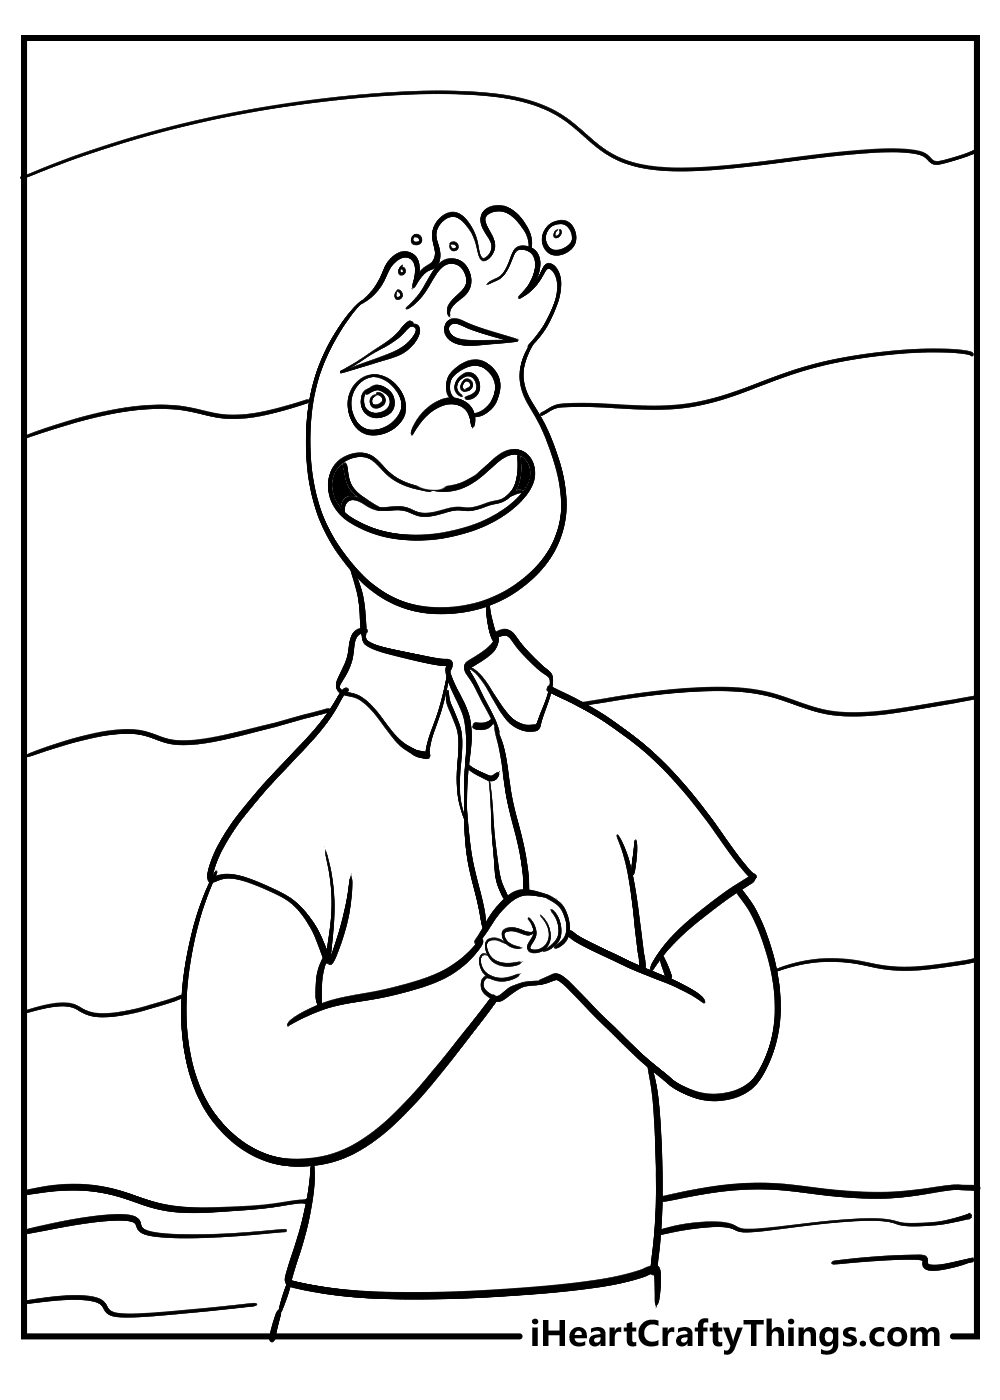 New Elemental Coloring Pages